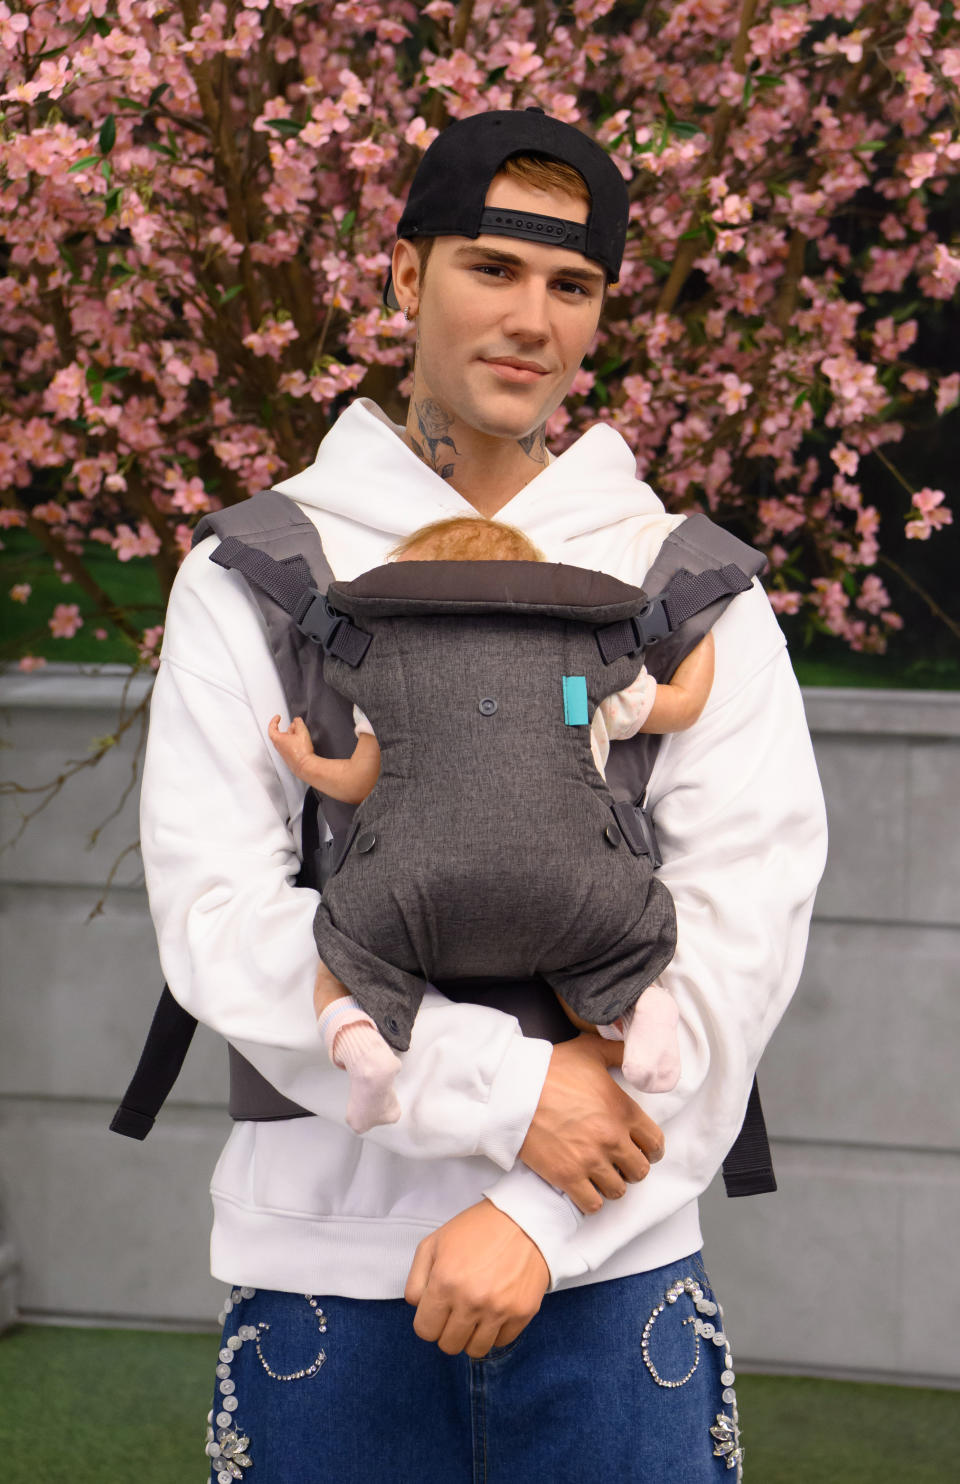 Caption: Baby, Baby, Baby, Oh! In celebration of Justin and Hailey Bieber's baby news Madame Tussauds London has dressed the dad-to-be with a baby carrier to help him get some all-important practice in ahead of the big arrival. Fans of the 'Baby' superstar can see the figure at the Baker Street attraction.